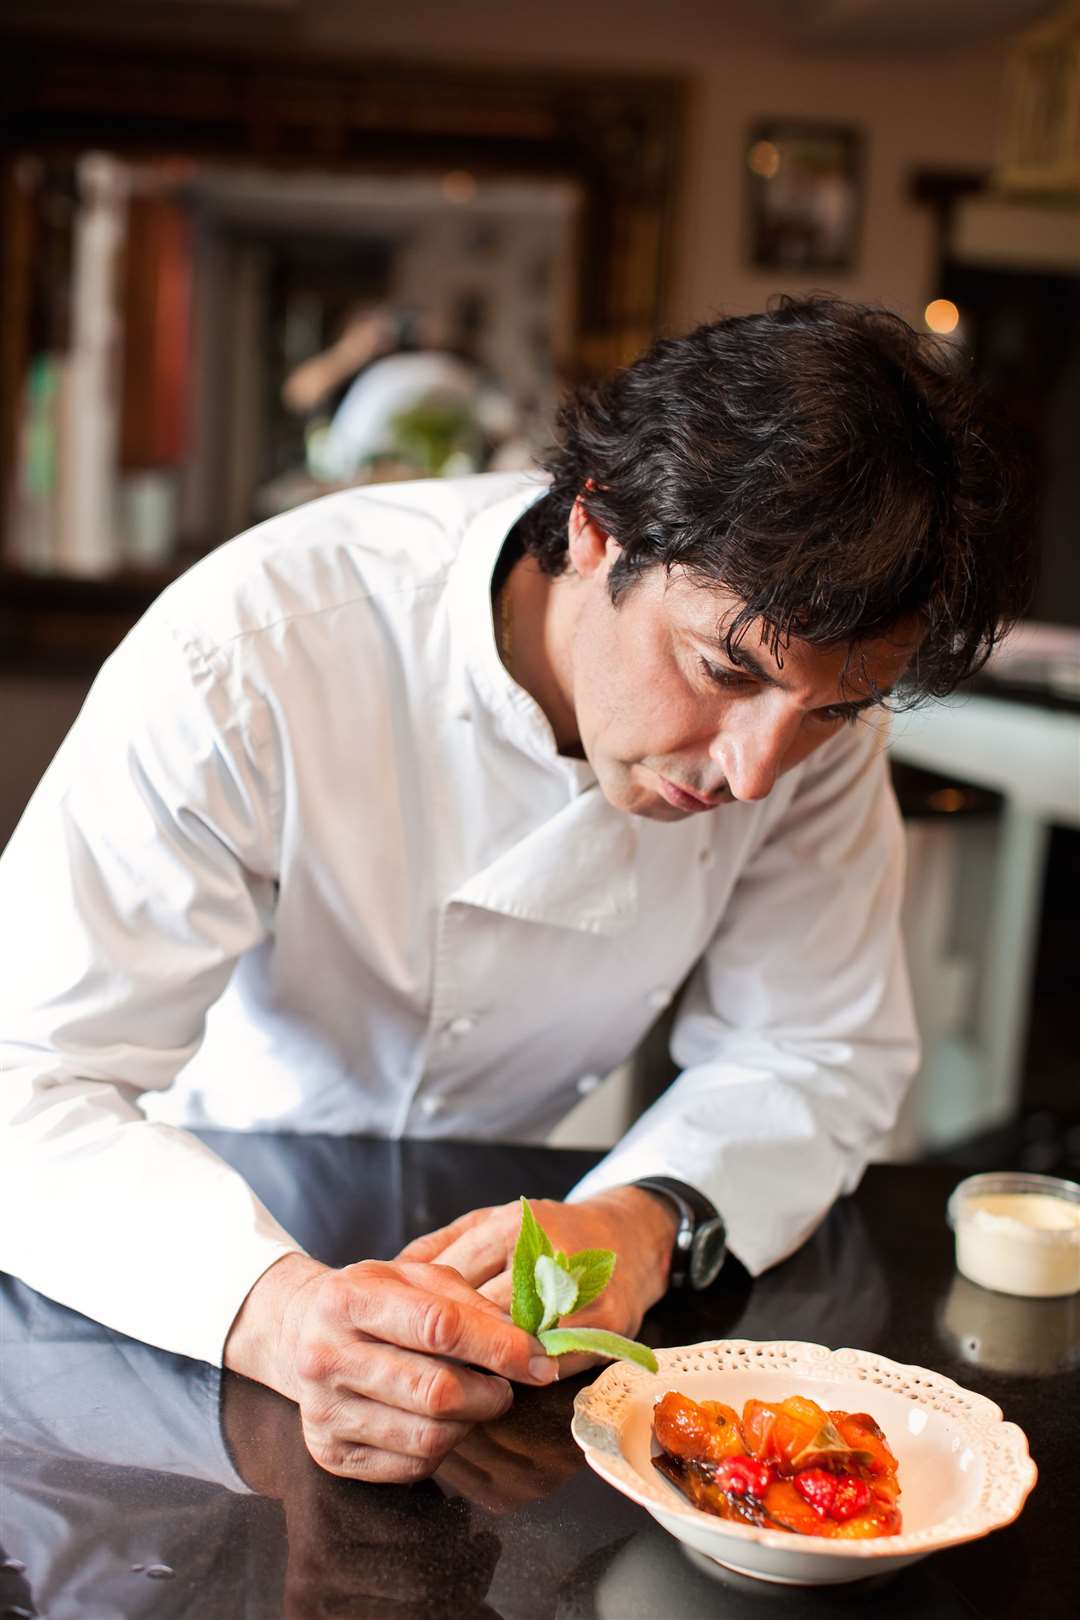 Jean-Christophe preparing one of his exquisite dishes.